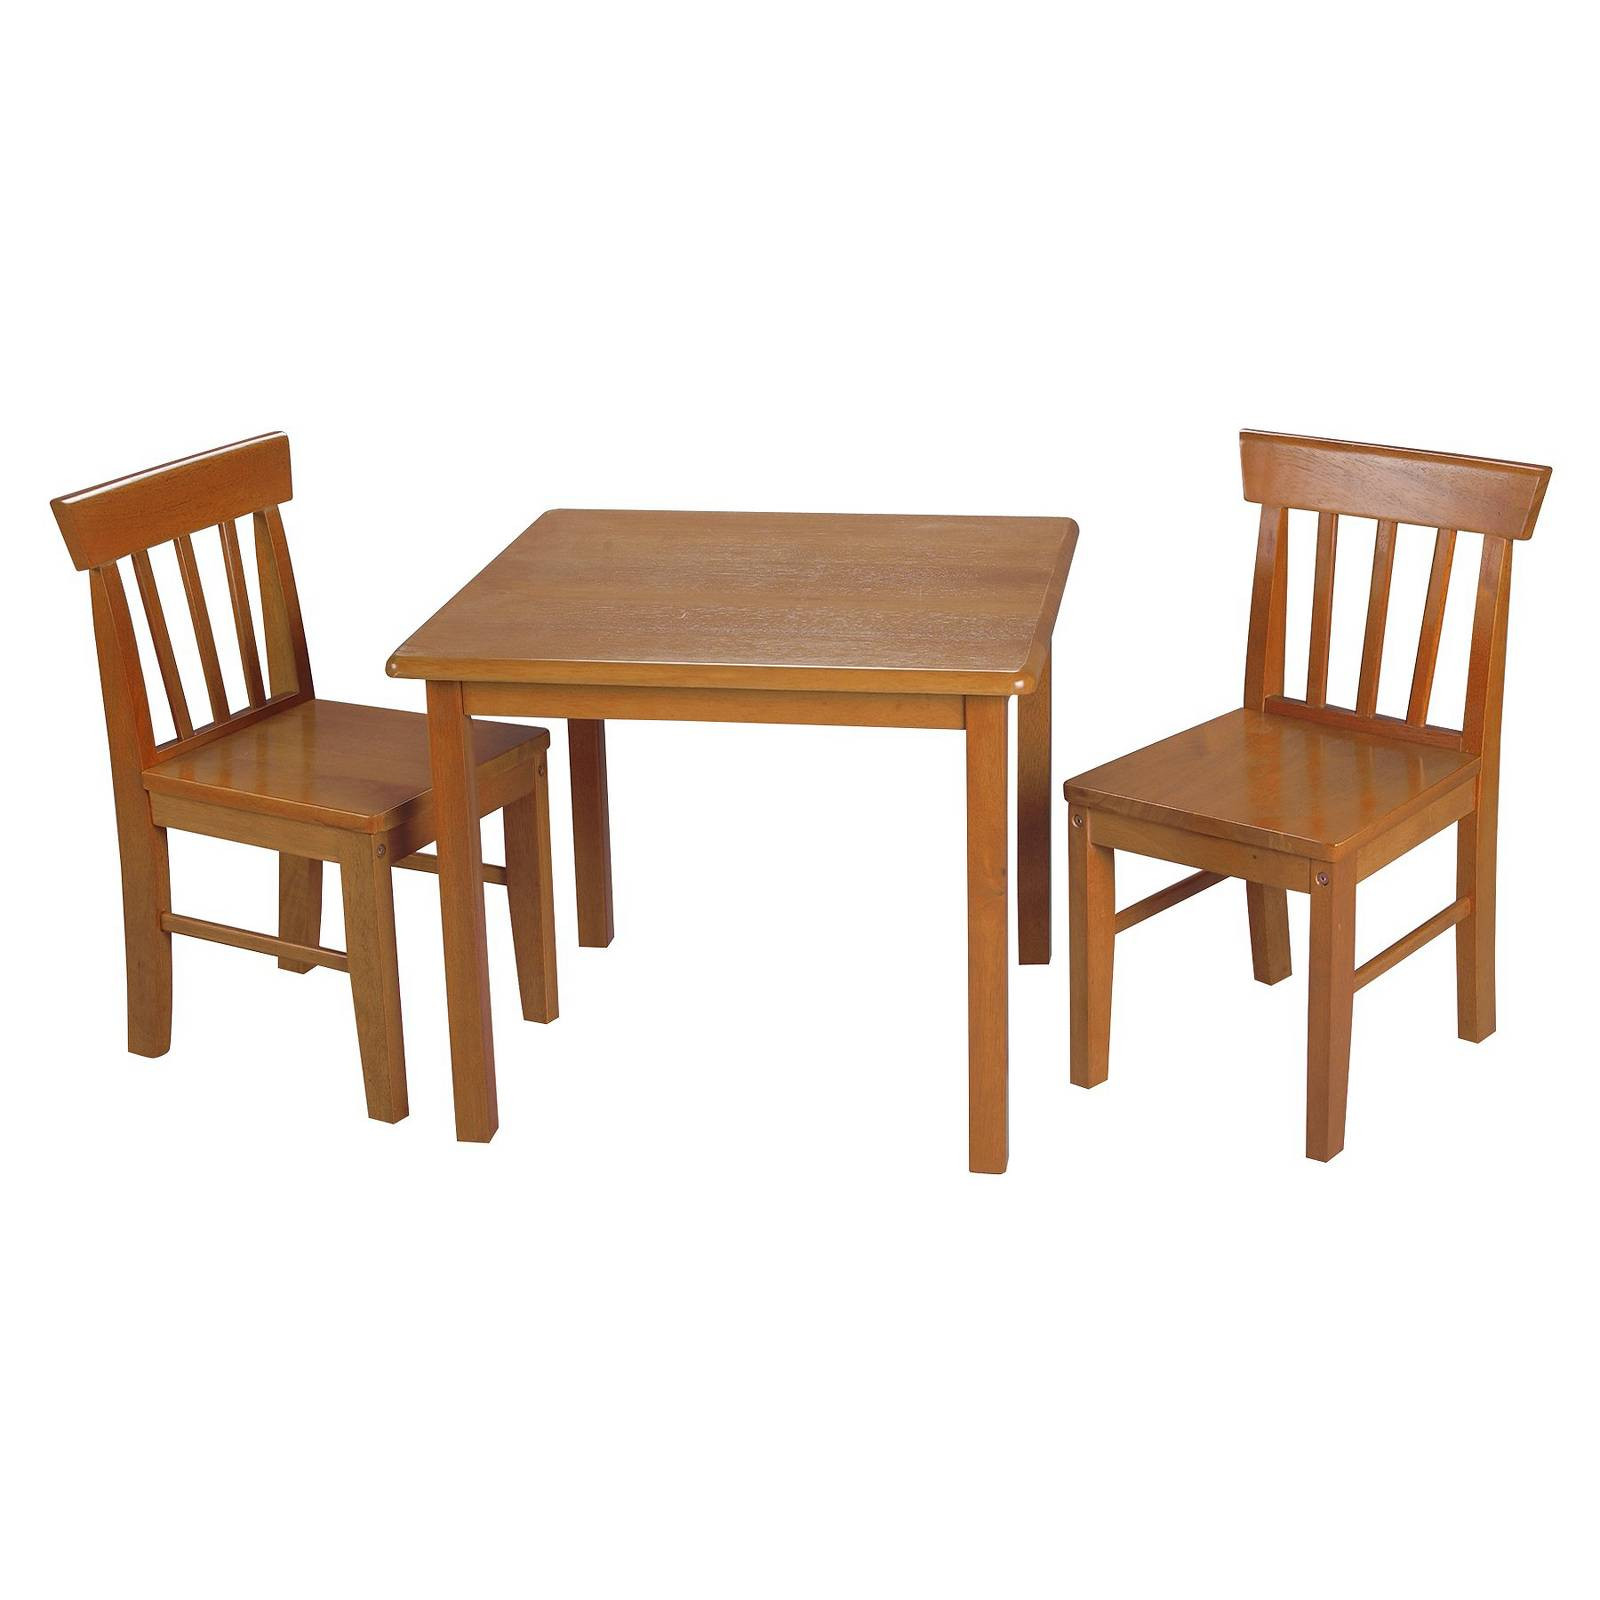 Kids Table And Chairs Target
 Gift Mark Square Kids Table 2 Chair set